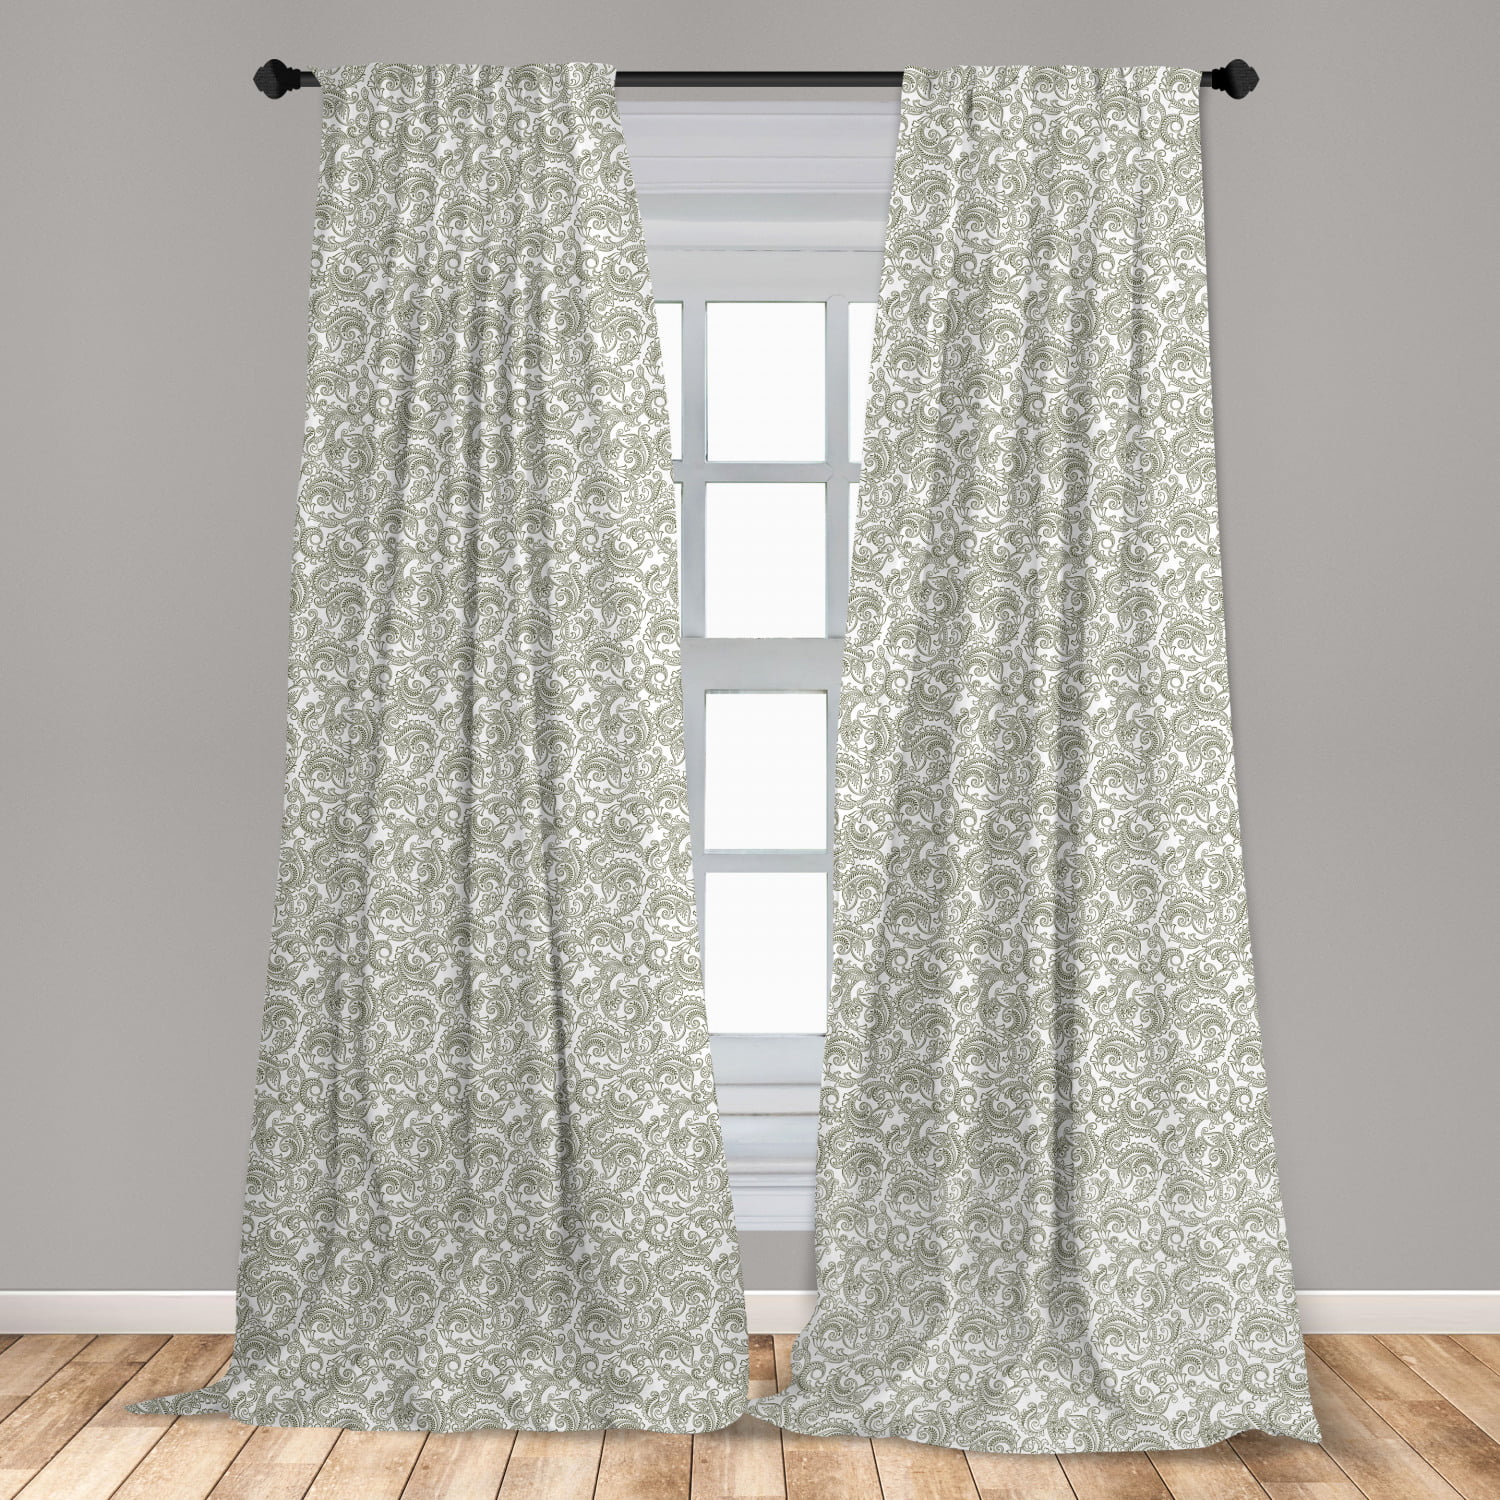 Details about   KEQIAOSUOCAI Abstract Floral Curtains Damask Medallion Pattern Curtain Pane... 